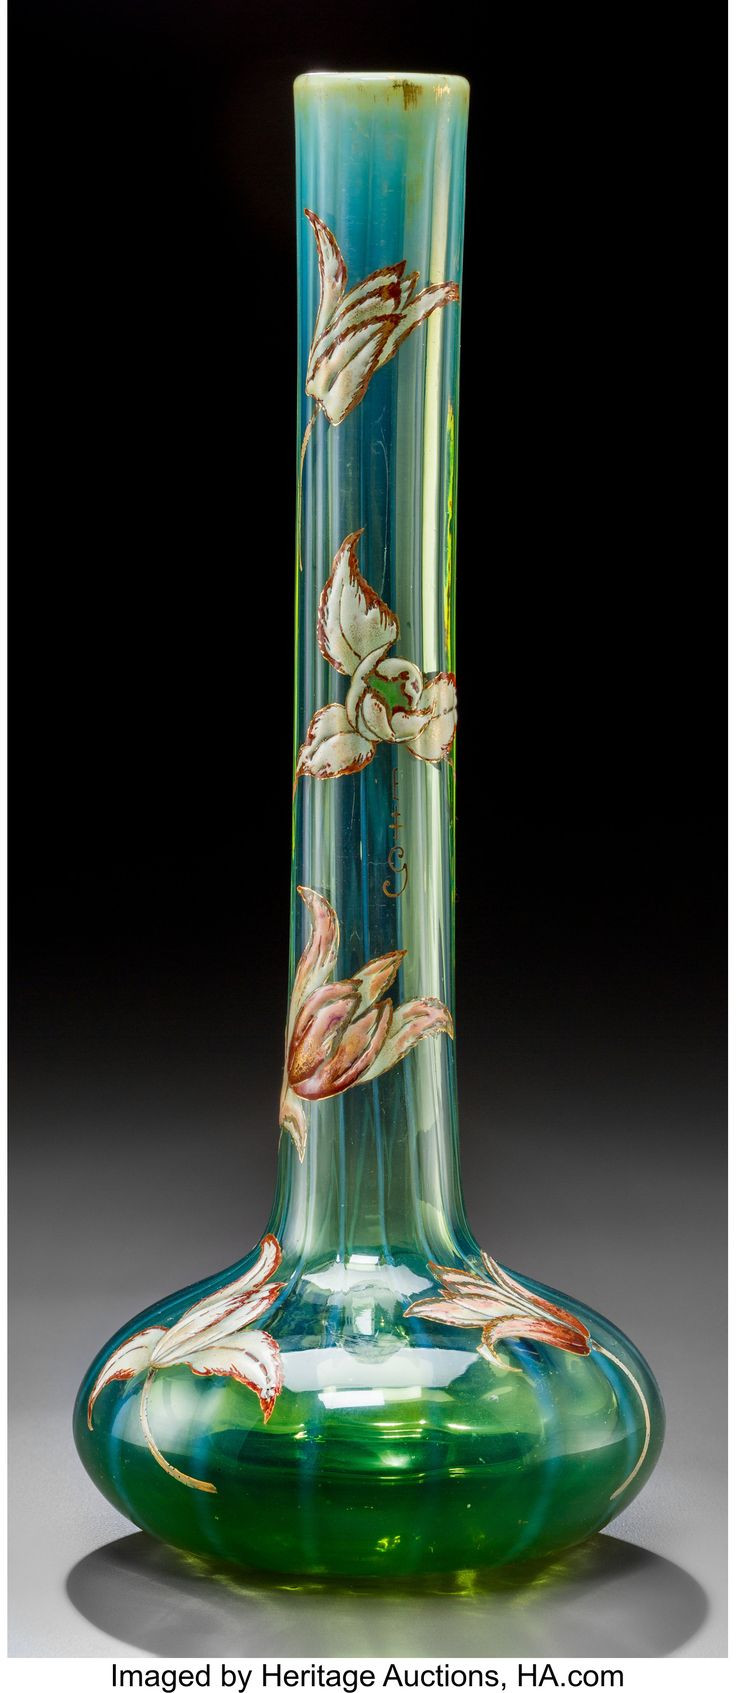 elegant expressions natural mixed media cylinder vase of 11474 best glassy images on pinterest glass art crystals and throughout tall galla opalescent green glass vase with enameled lilies lot 79102 heritage